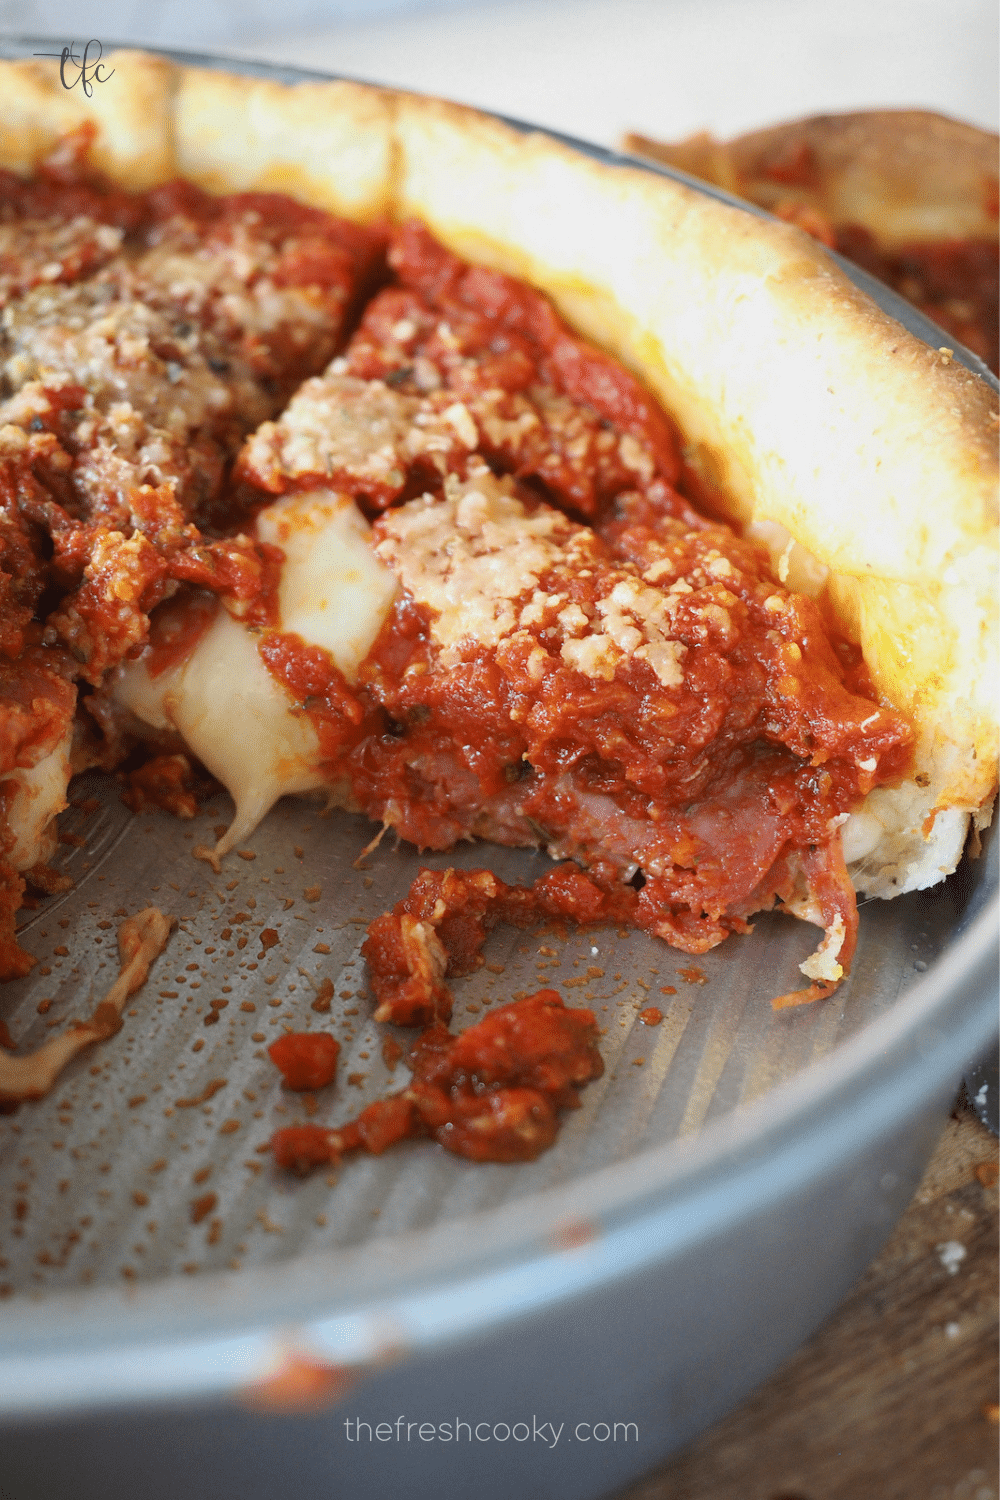 How To Make The Best Chicago Deep Dish Pizza - Ramshackle Pantry